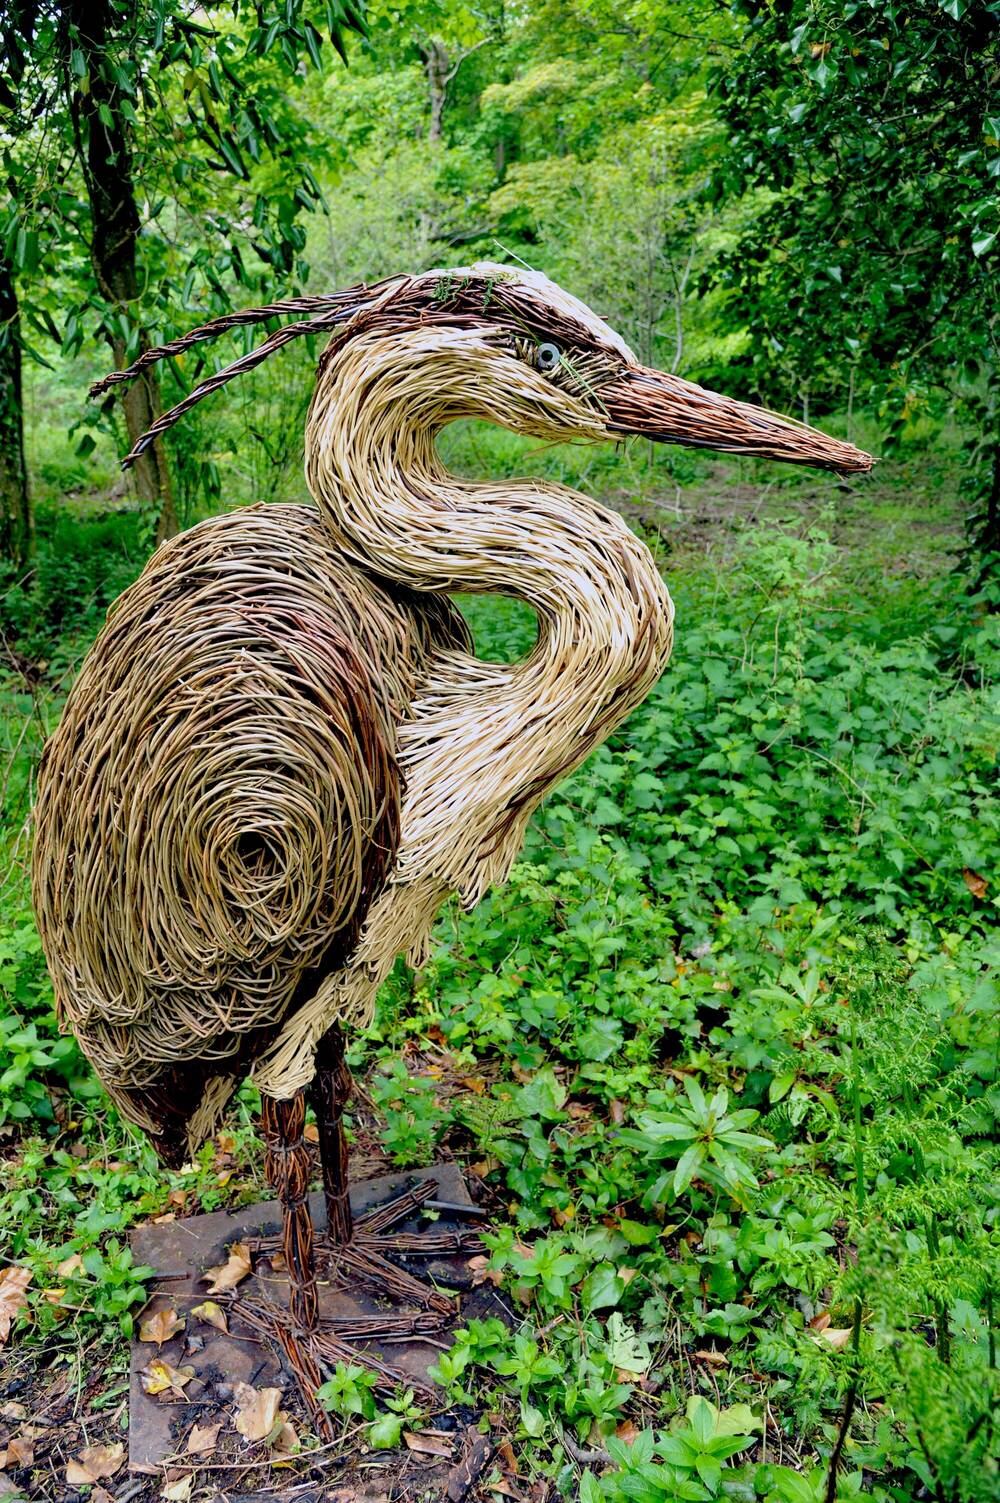 A willow sculpture of a heron in woodland.